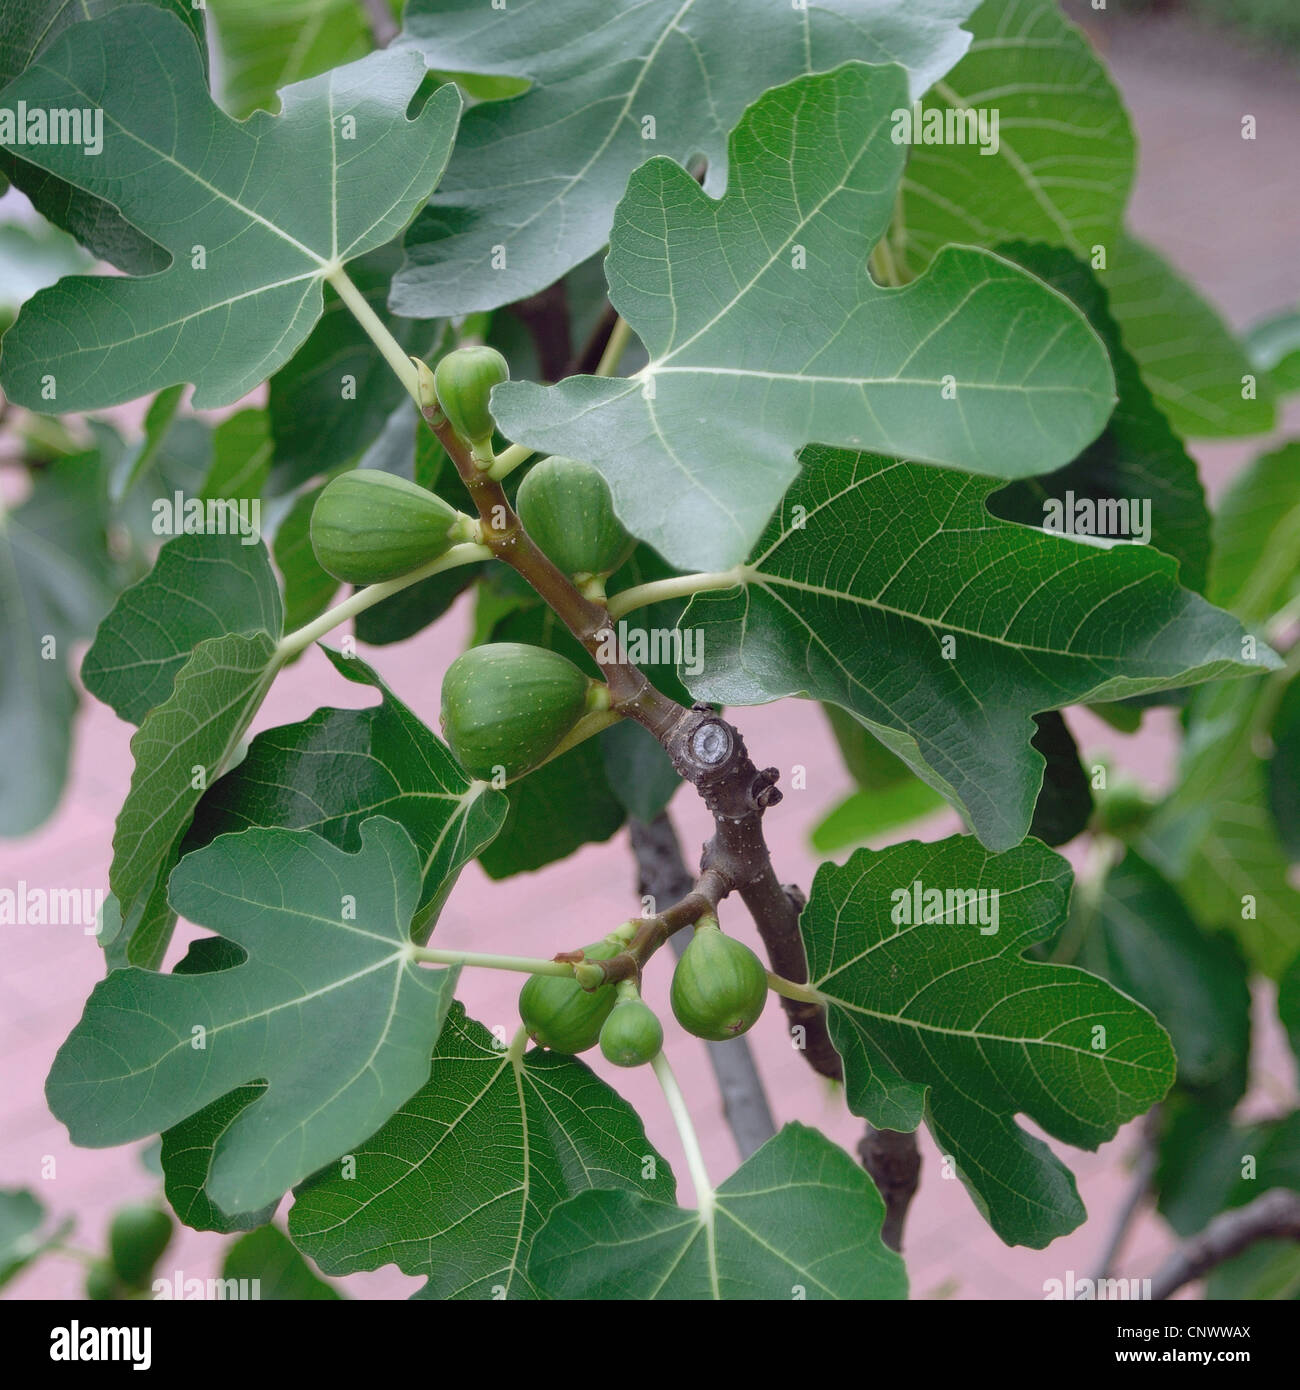 edible fig, common fig (Ficus carica), fruiting twig Stock Photo